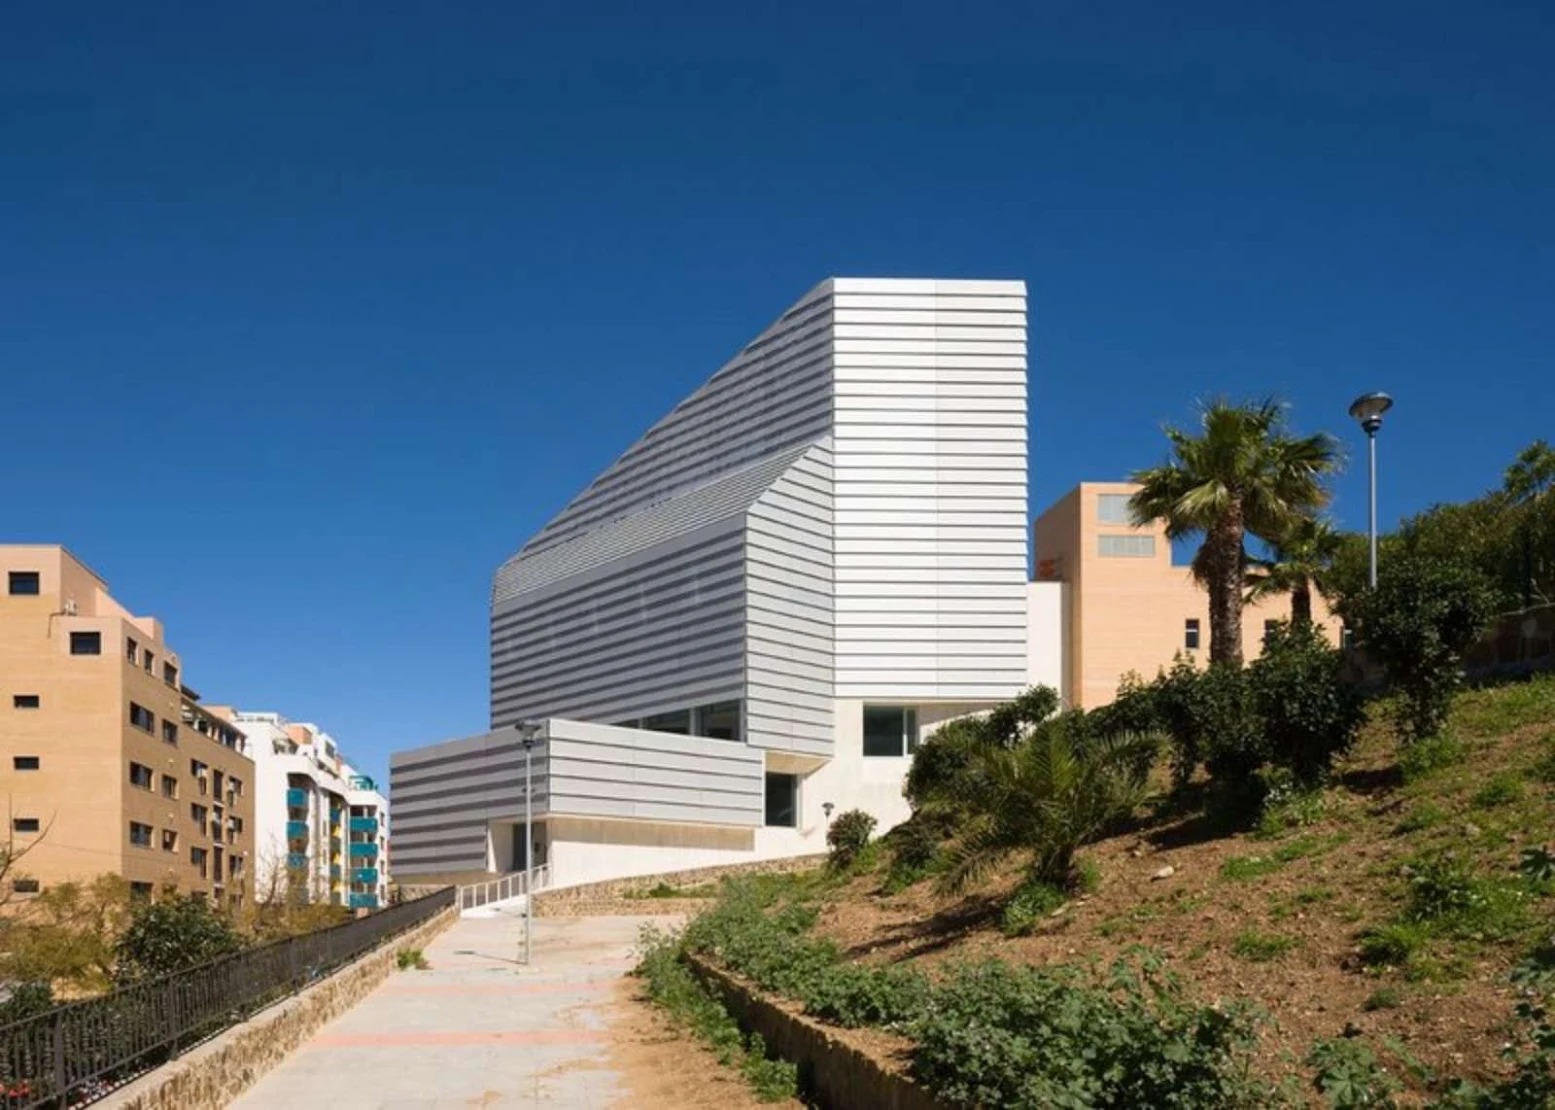 Public Library in Ceuta by Paredes Pedrosa